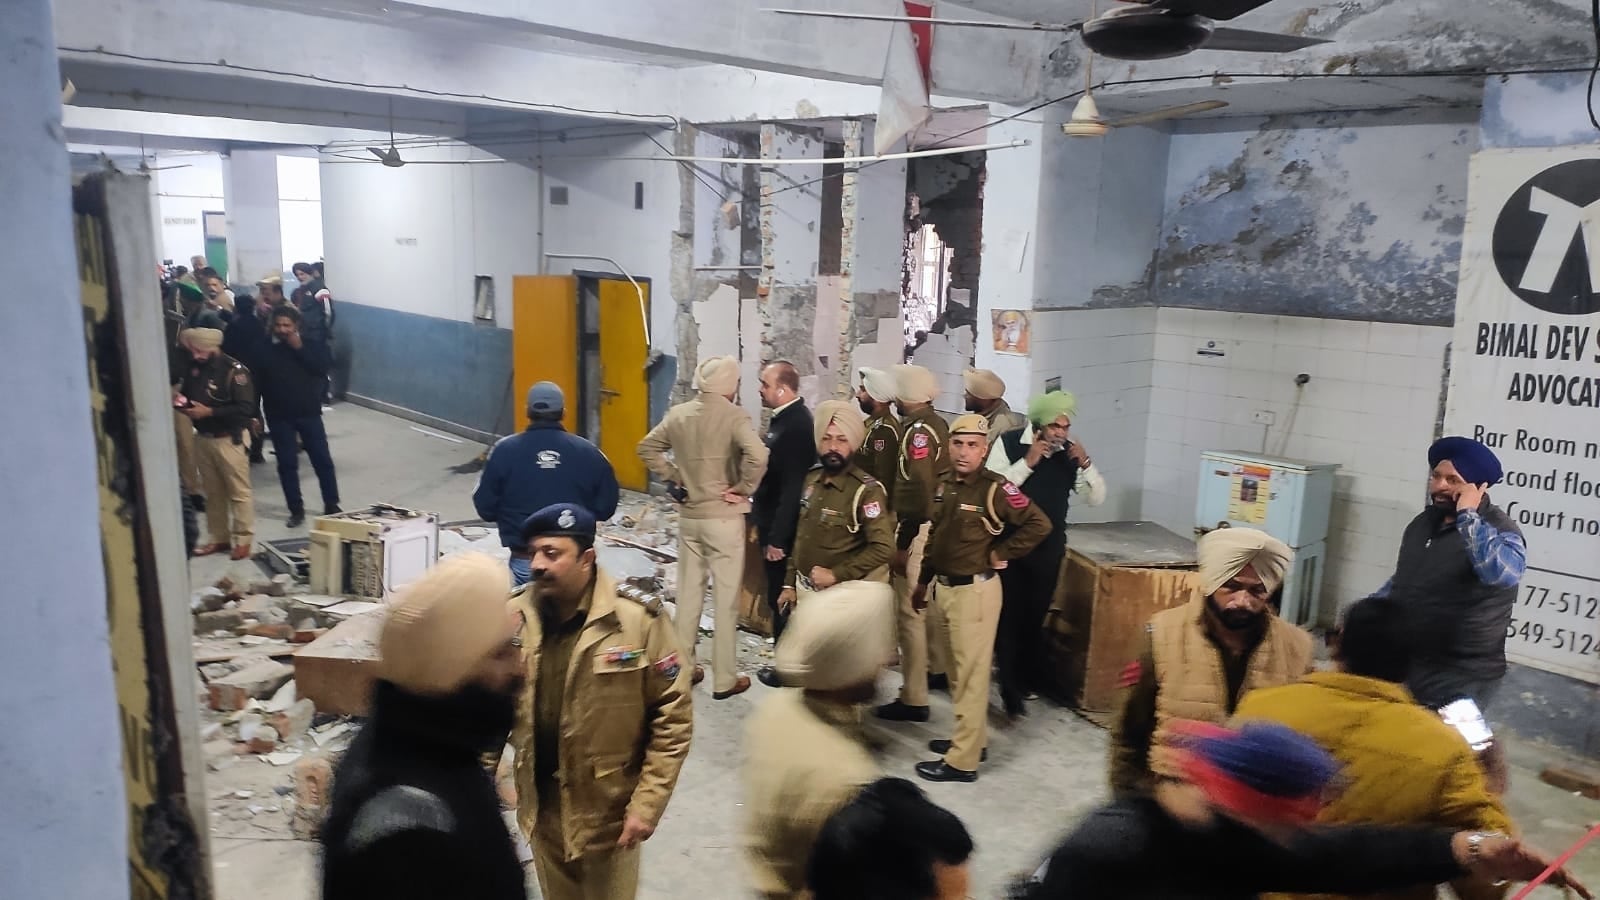 Explosion inside Ludhiana district court complex; 2 dead, 5 injured | Latest News India - Hindustan Times